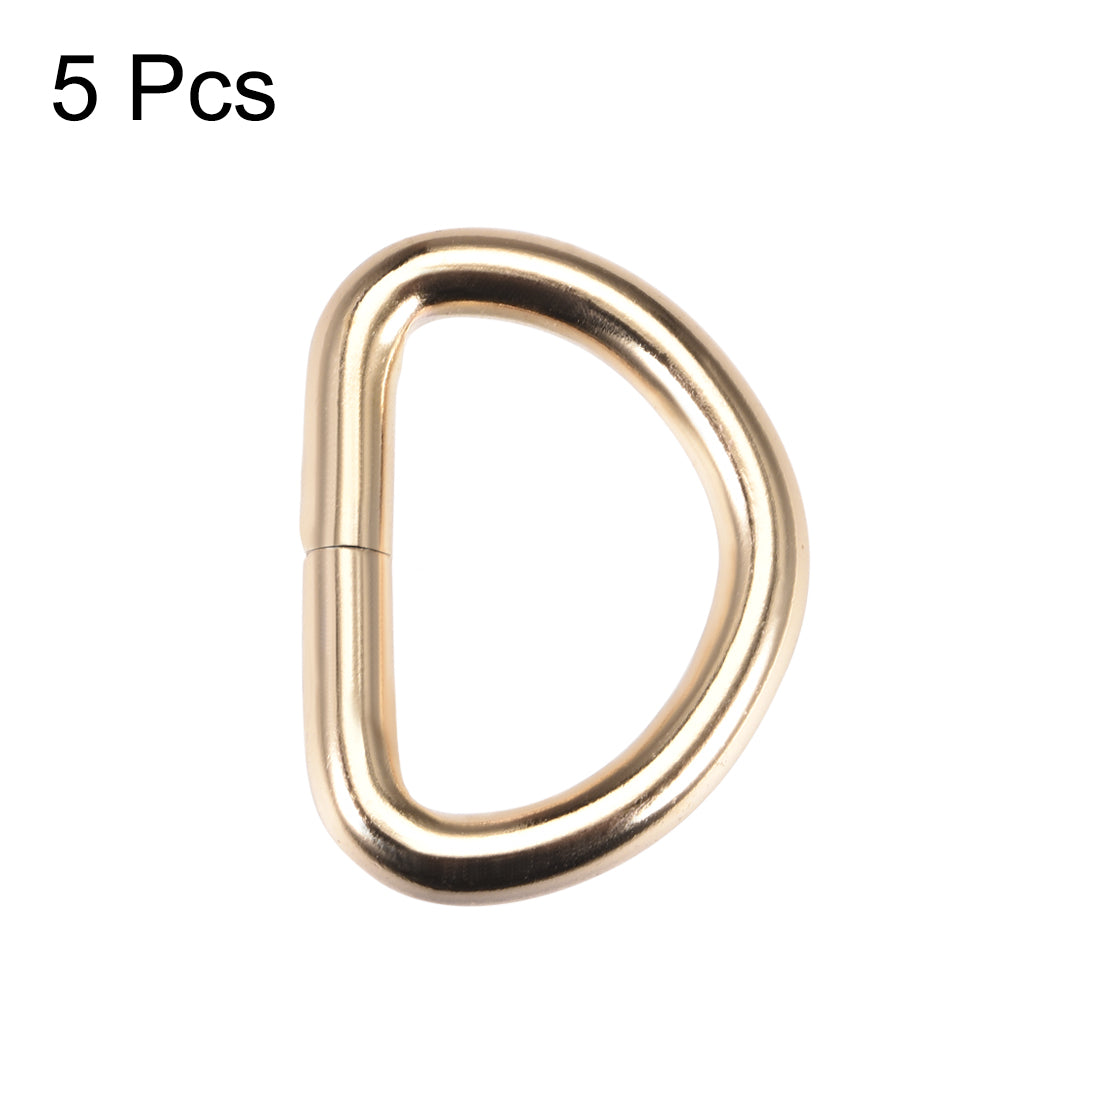 uxcell Uxcell 5 Pcs D Ring Buckle 1 Inch Metal Semi-Circular D-Rings Gold Tone for Hardware Bags Belts Craft DIY Accessories